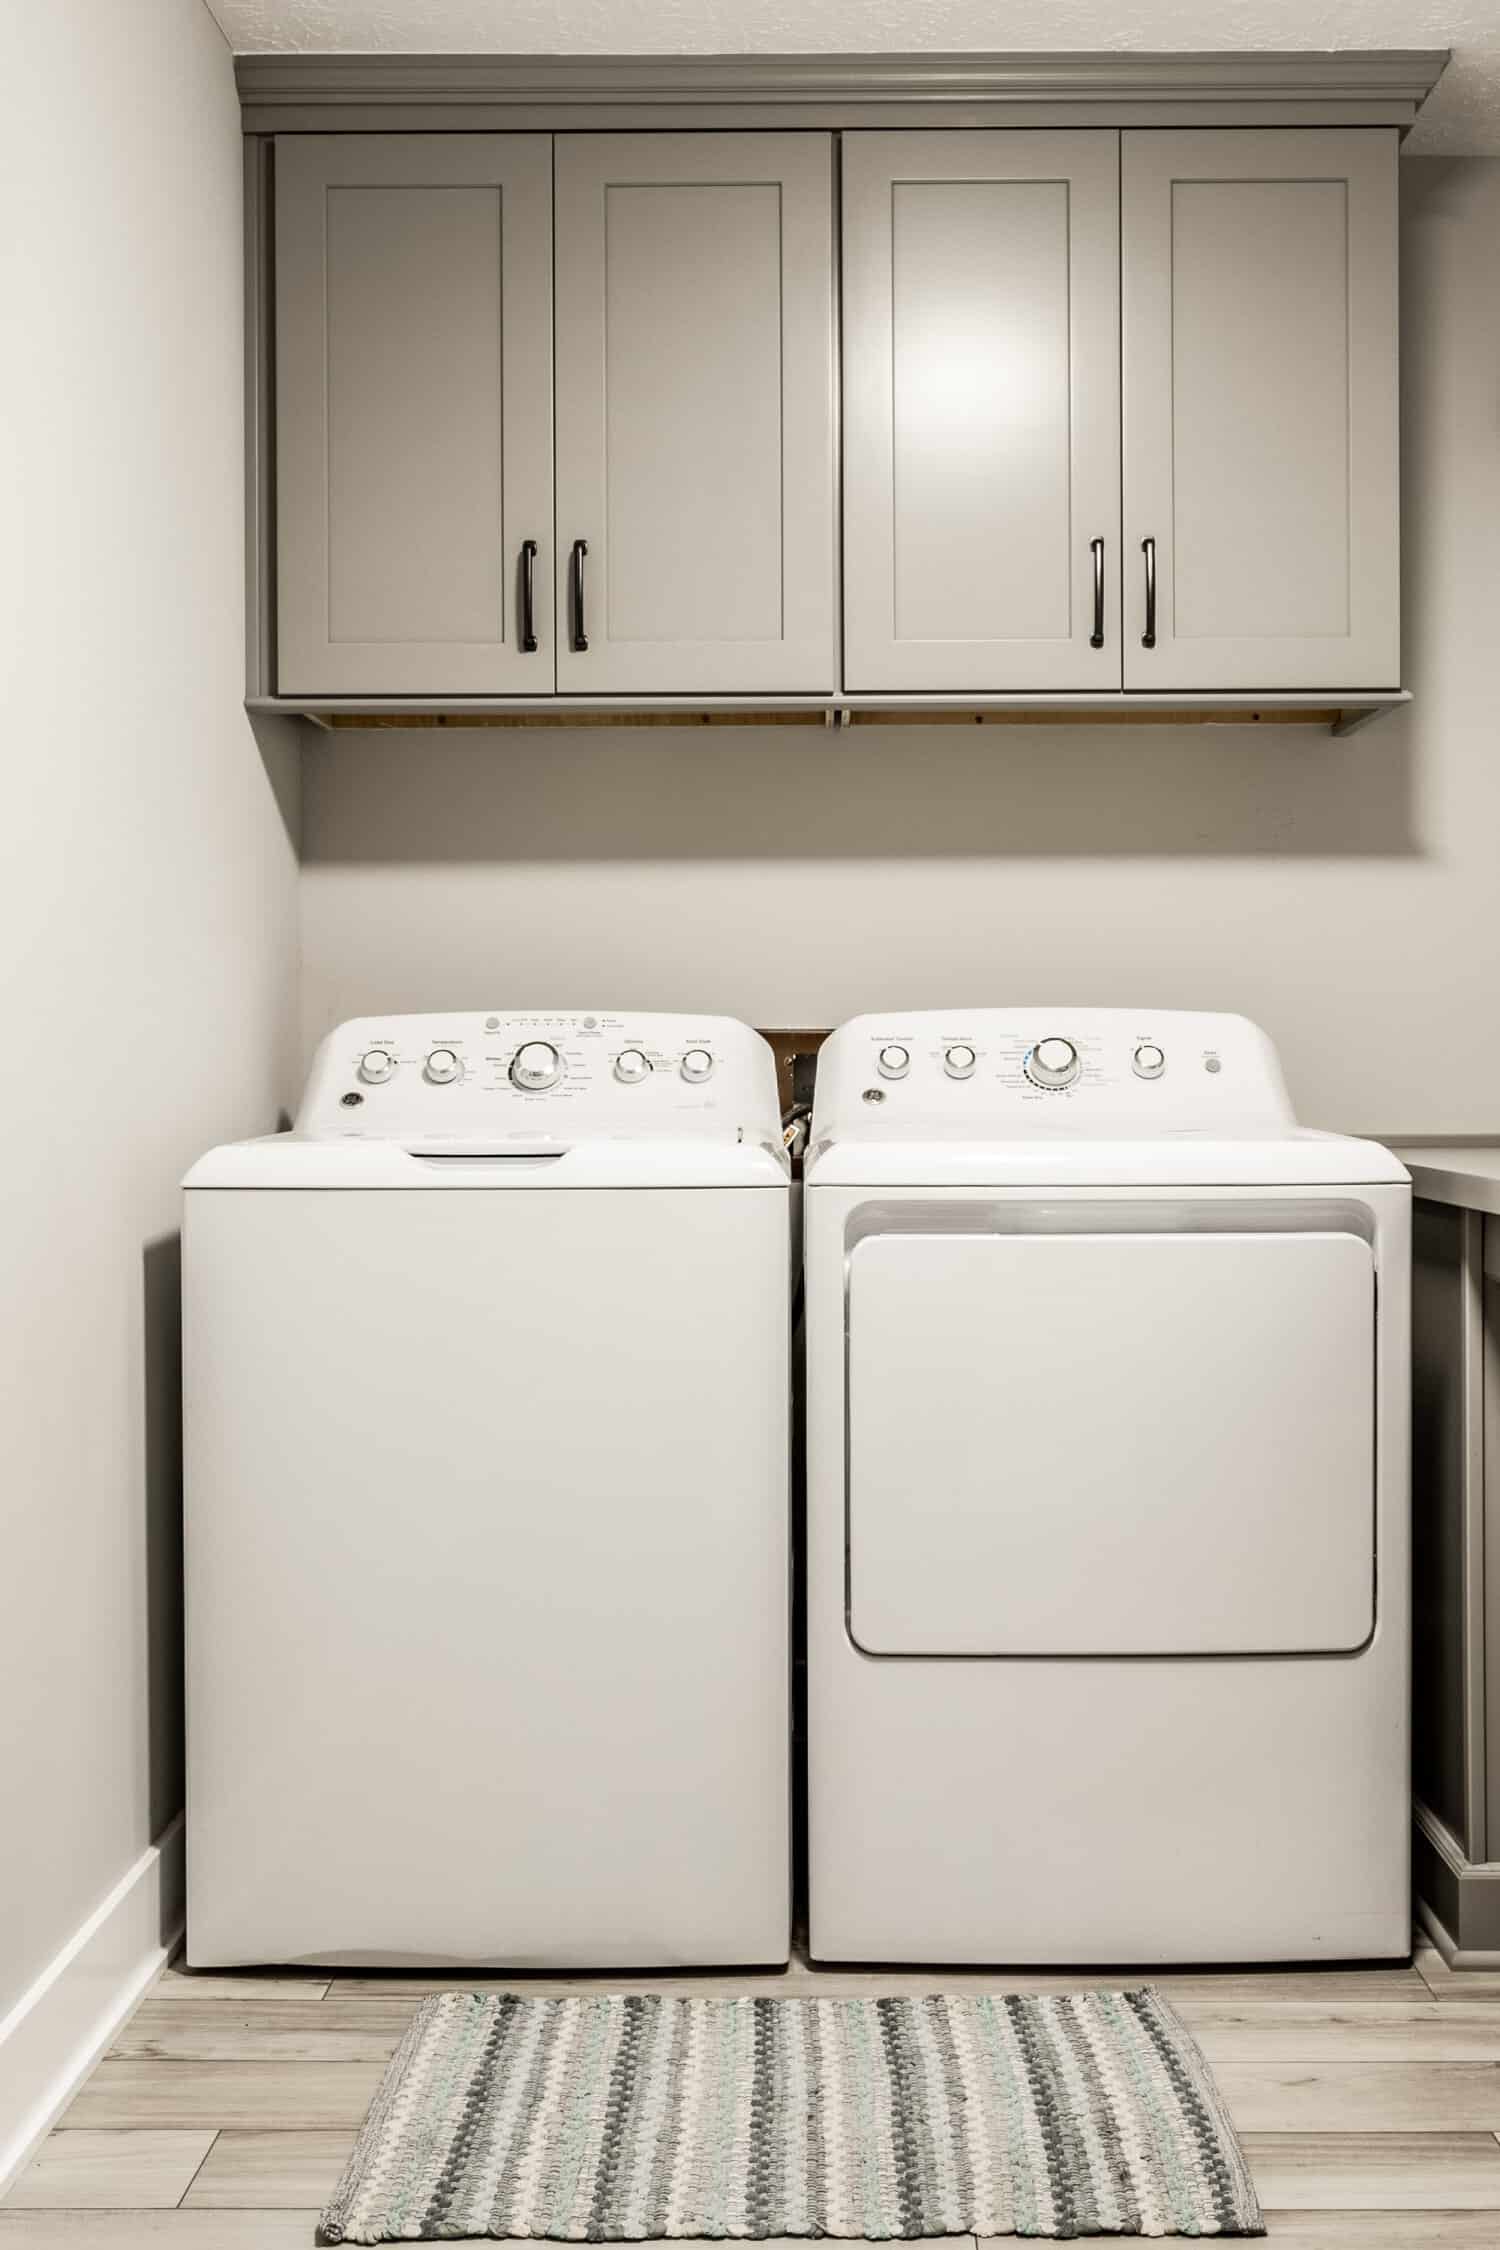 Nicholas Design Build | A remodeled laundry room with a washer and dryer.